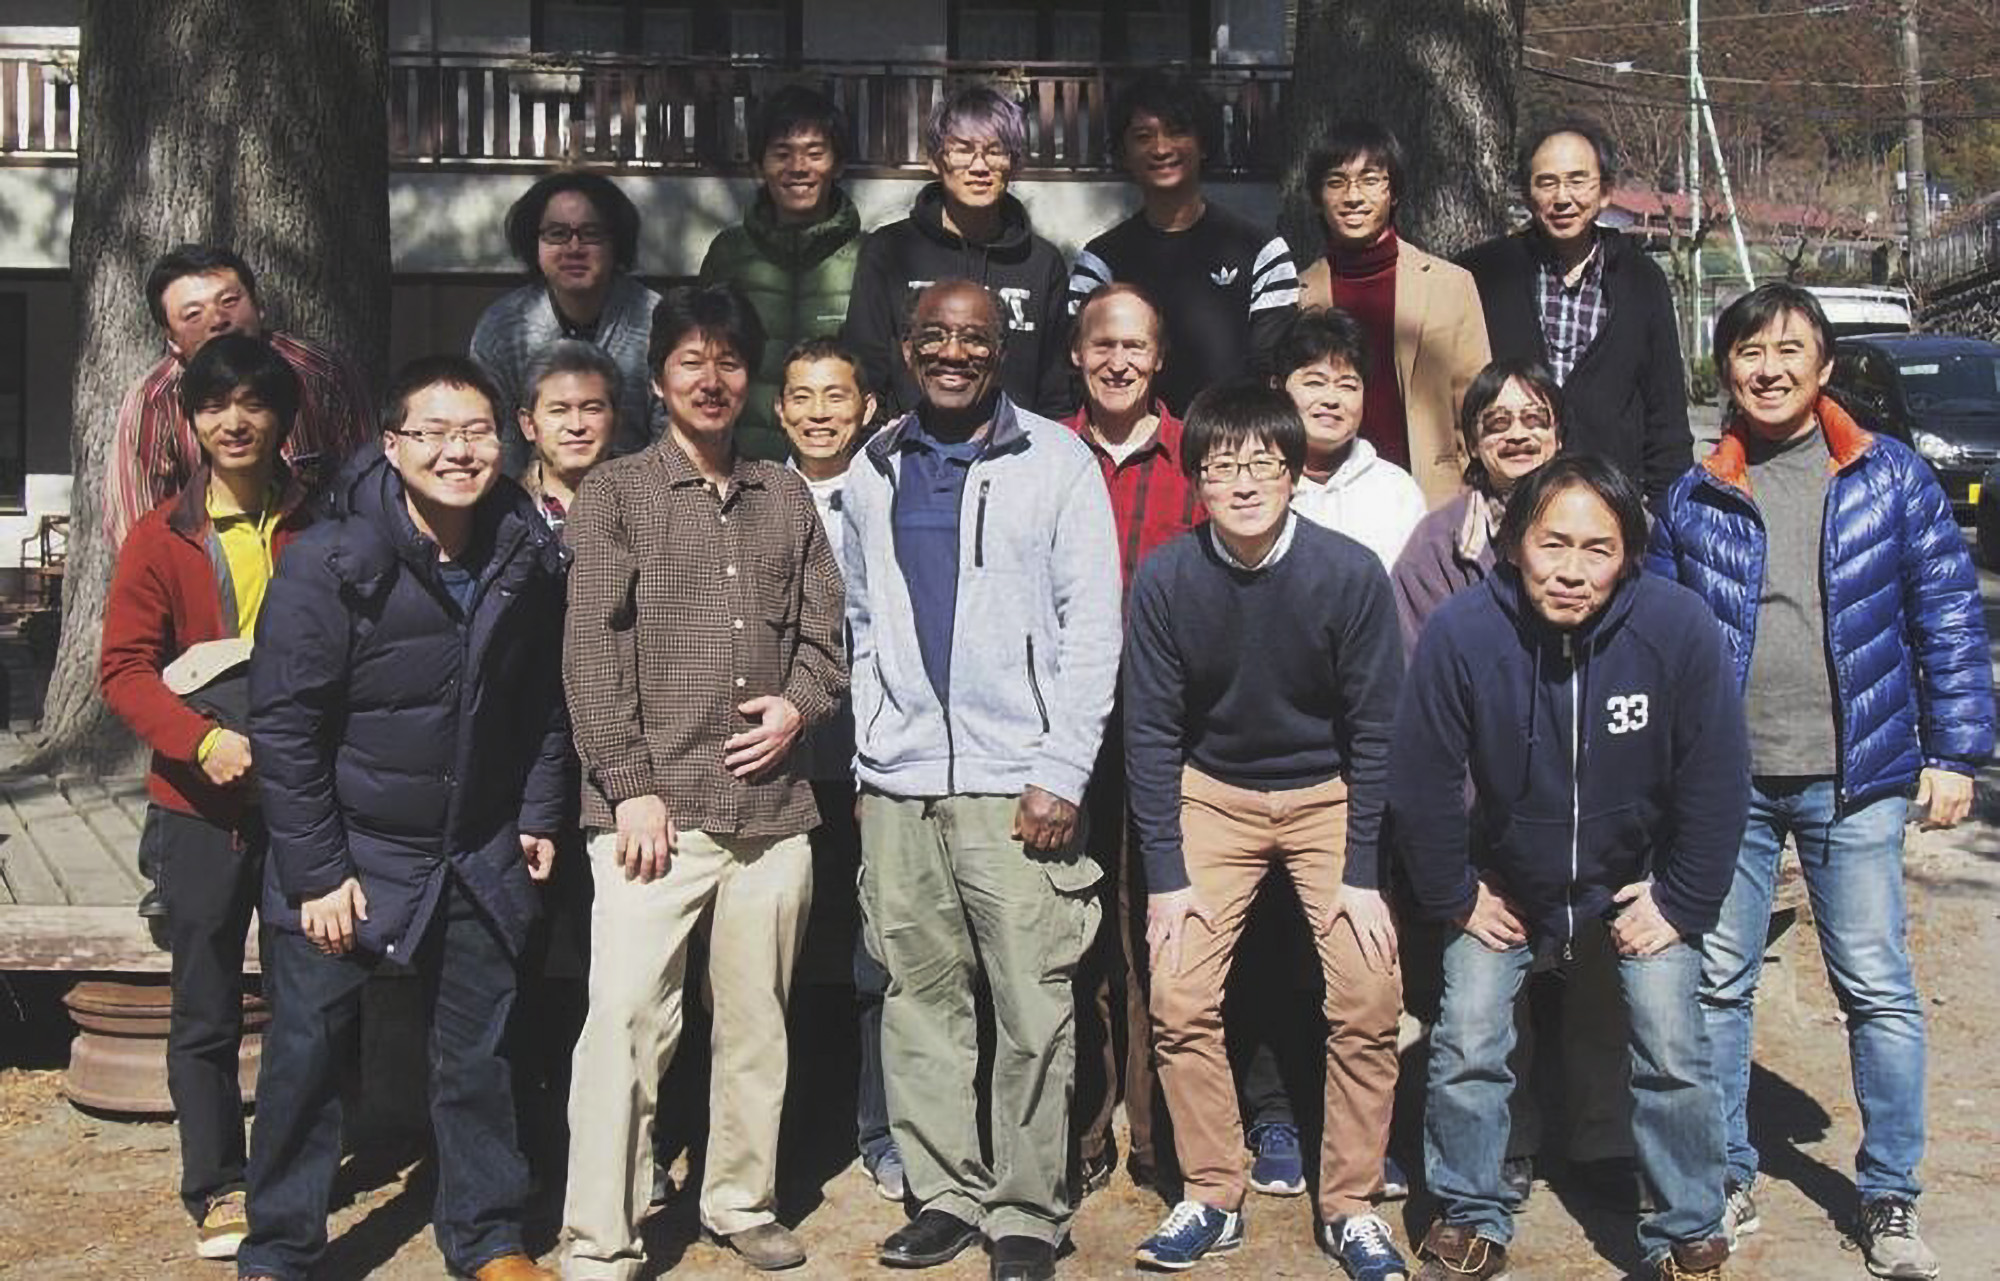 Gary Ham, center, with a group of people on his trip to Japan